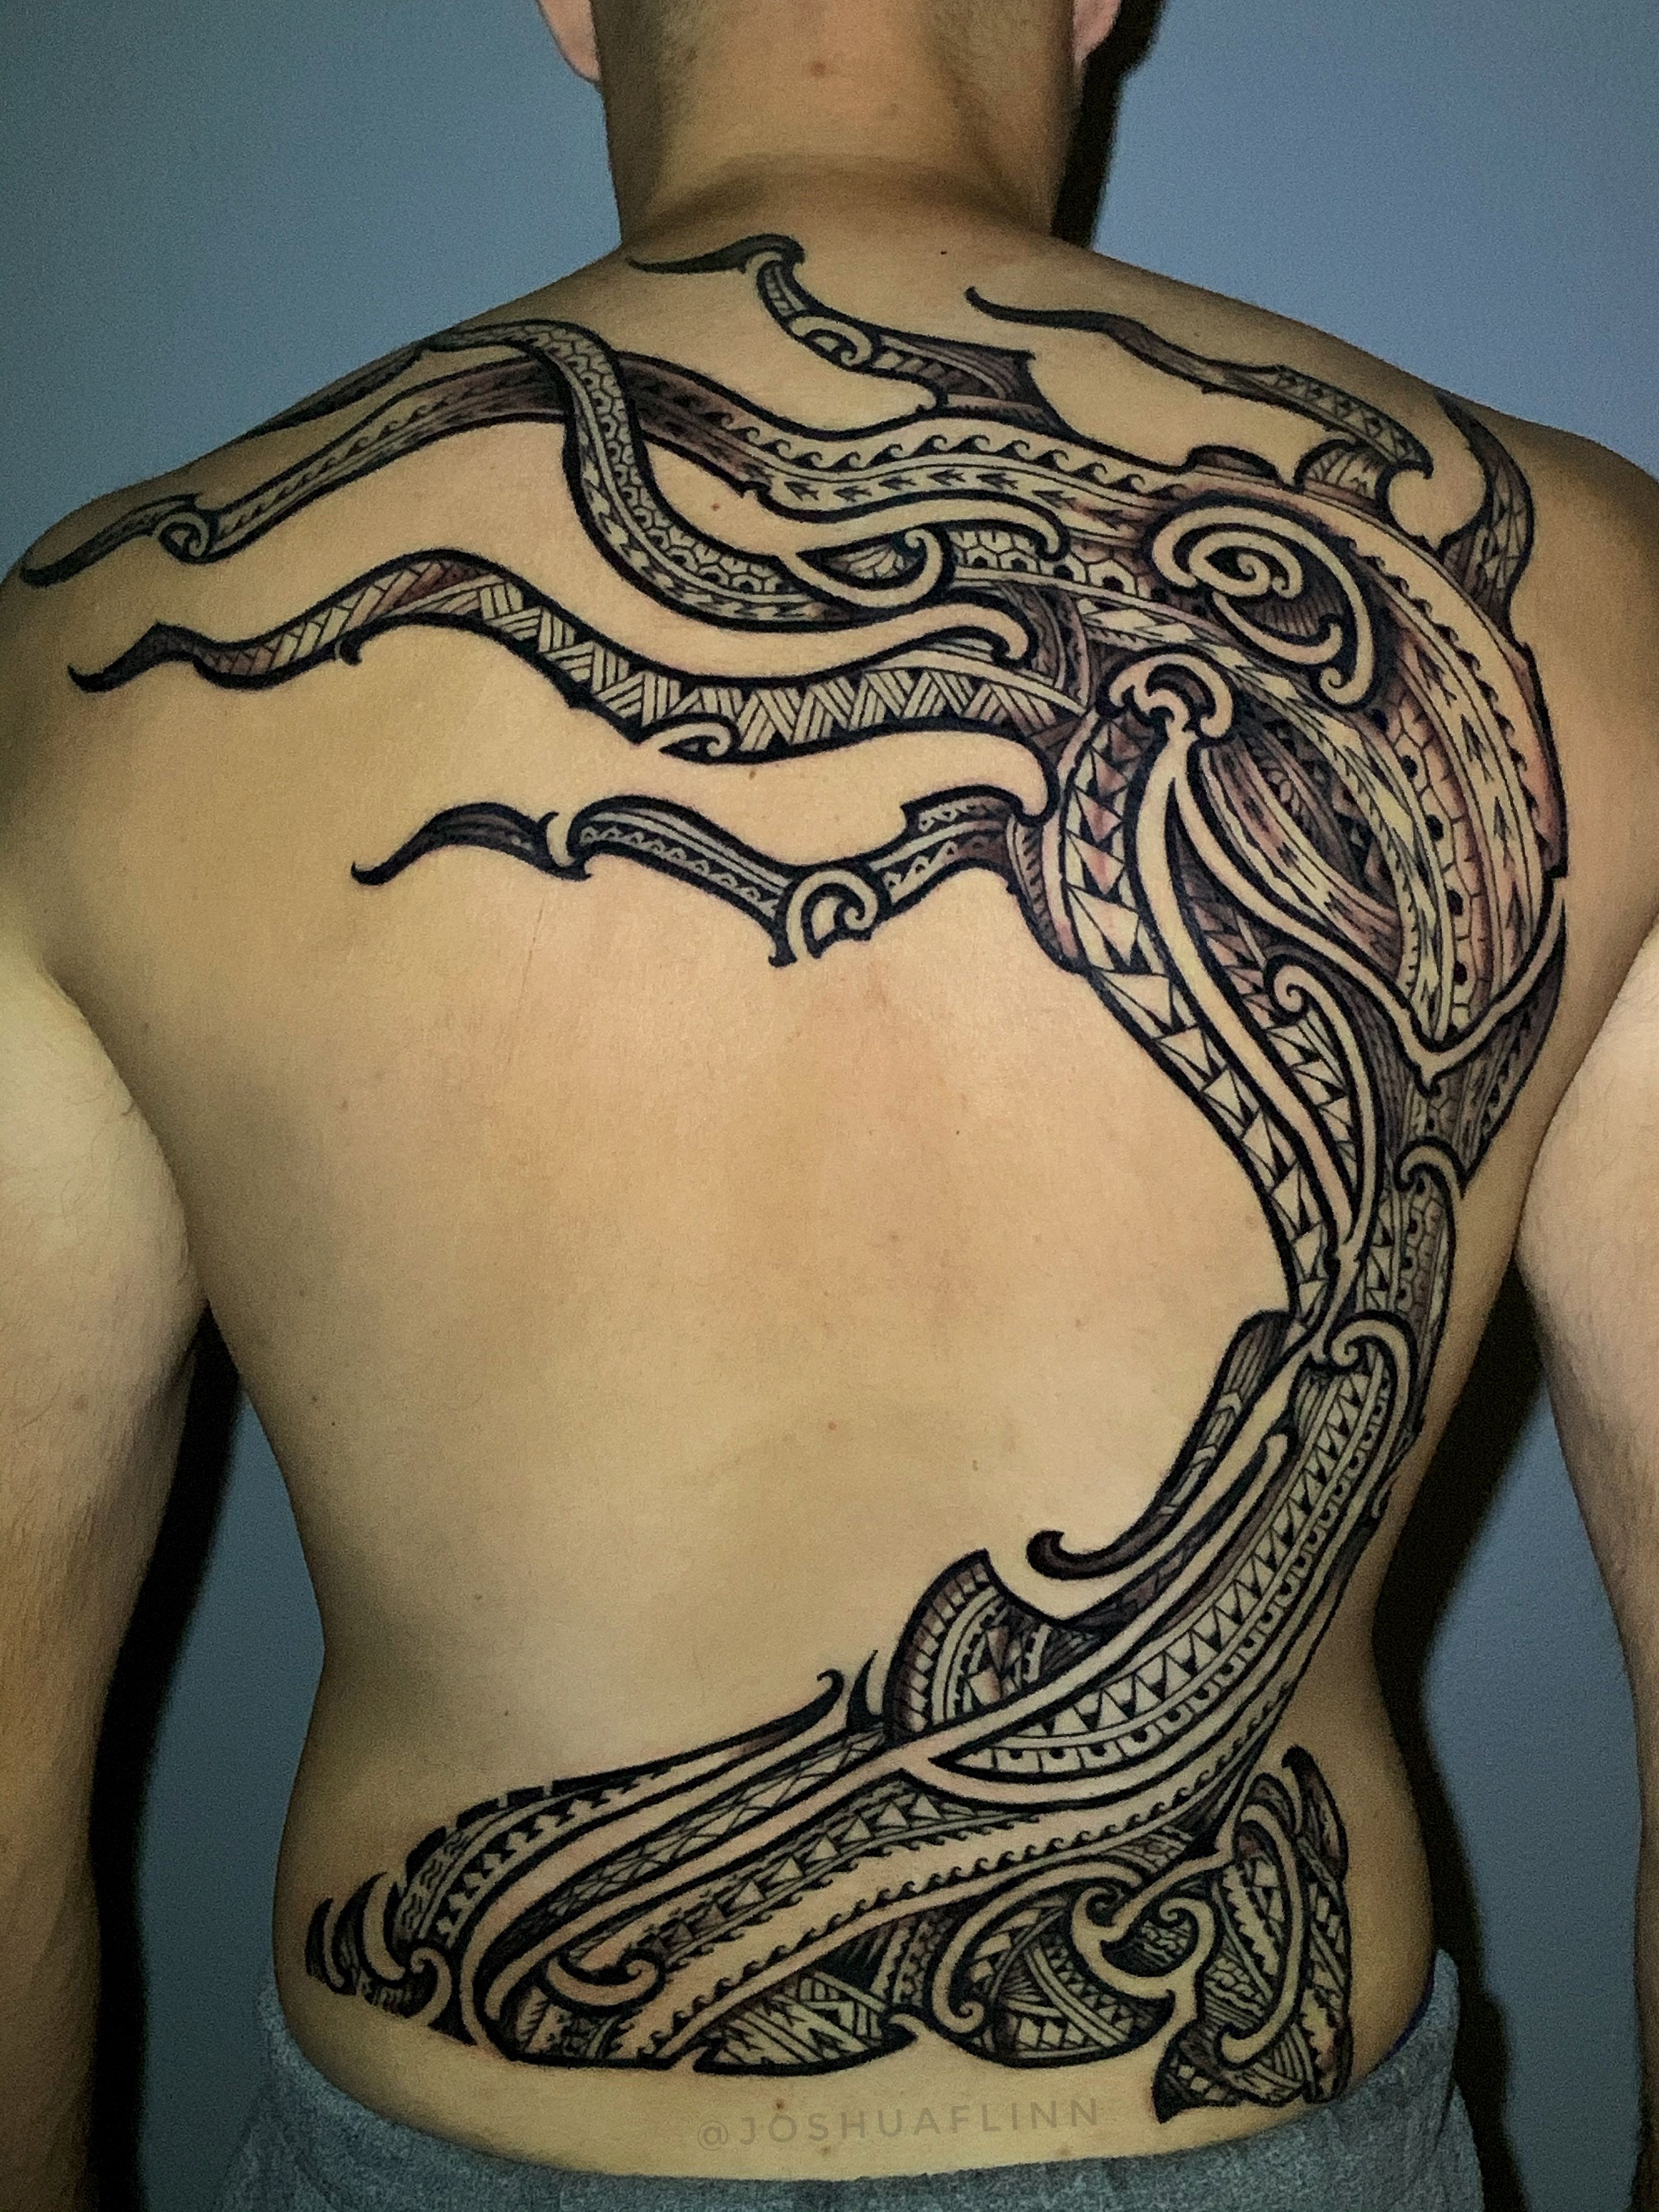 Mid-Pacific Tattoo Lahaina - #repost @kaib_knight ・・・ OCTO-HEʻE-TAKO Click  the link in bio to set up an appointment or call 808-875-1500 . . . .  #midpacifictattoo #midpacifictattookihei #polynesian #polynesiantattoo  #tribaltattoo #tako #octopus #